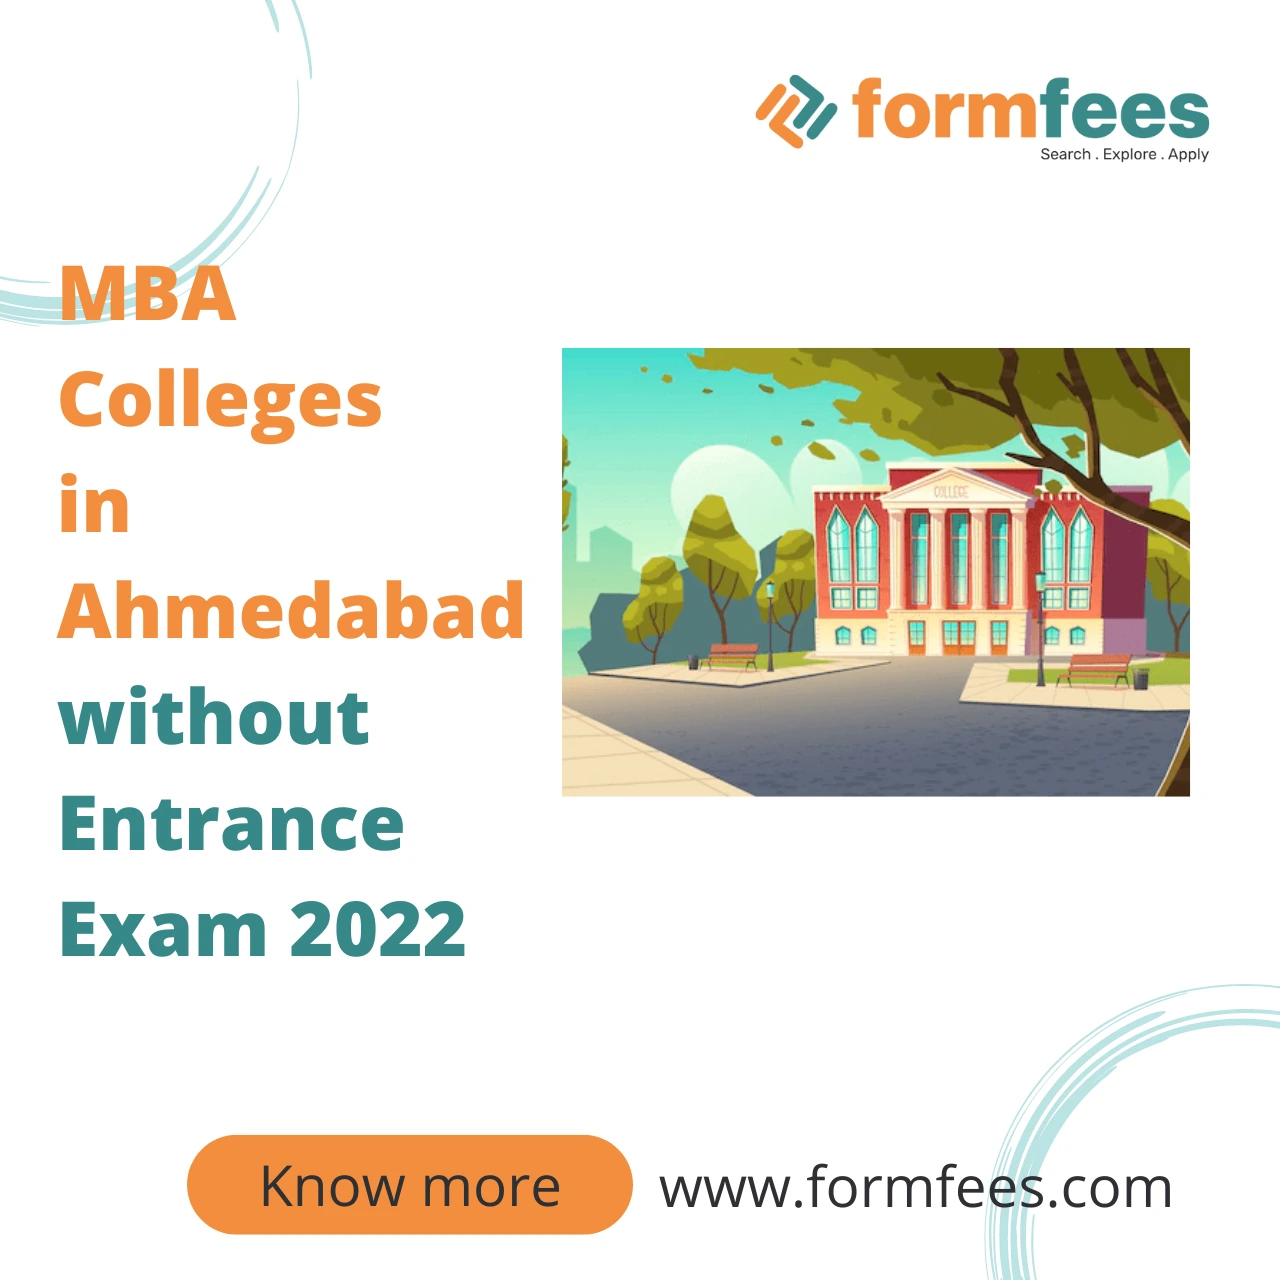 MBA Colleges in Ahmedabad without Entrance Exam 2022